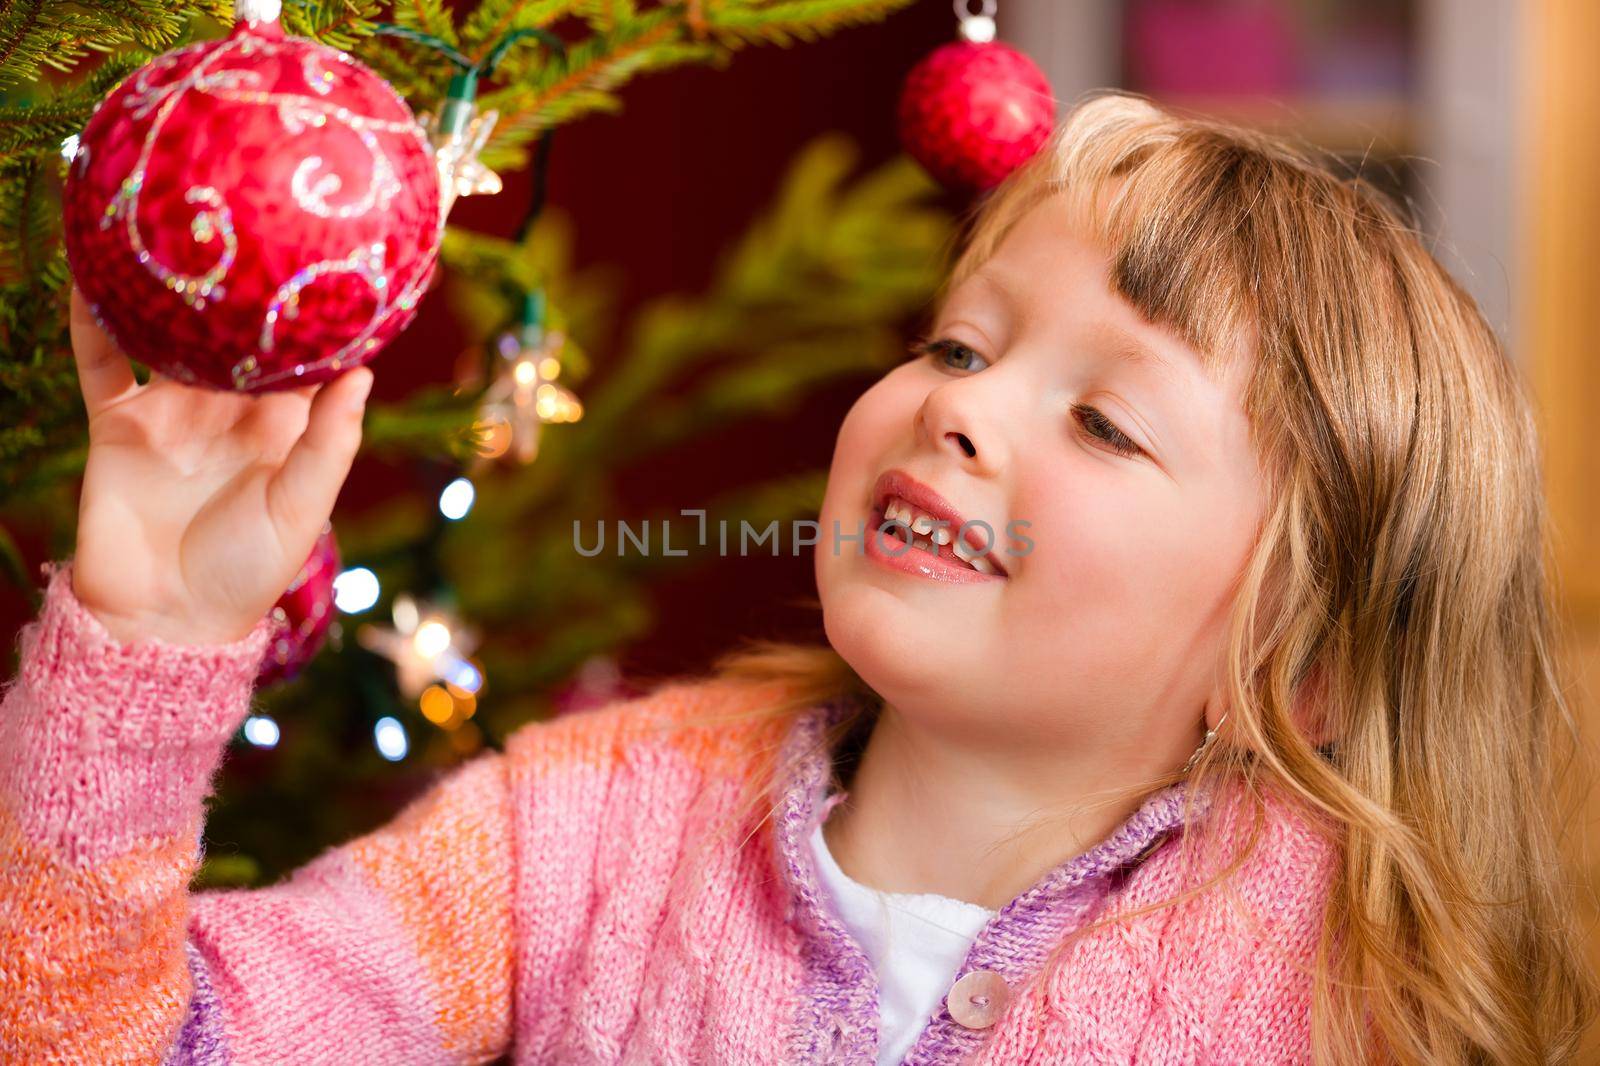 Young girl helping decorating the Christmas tree, holding some Christmas baubles in her hand